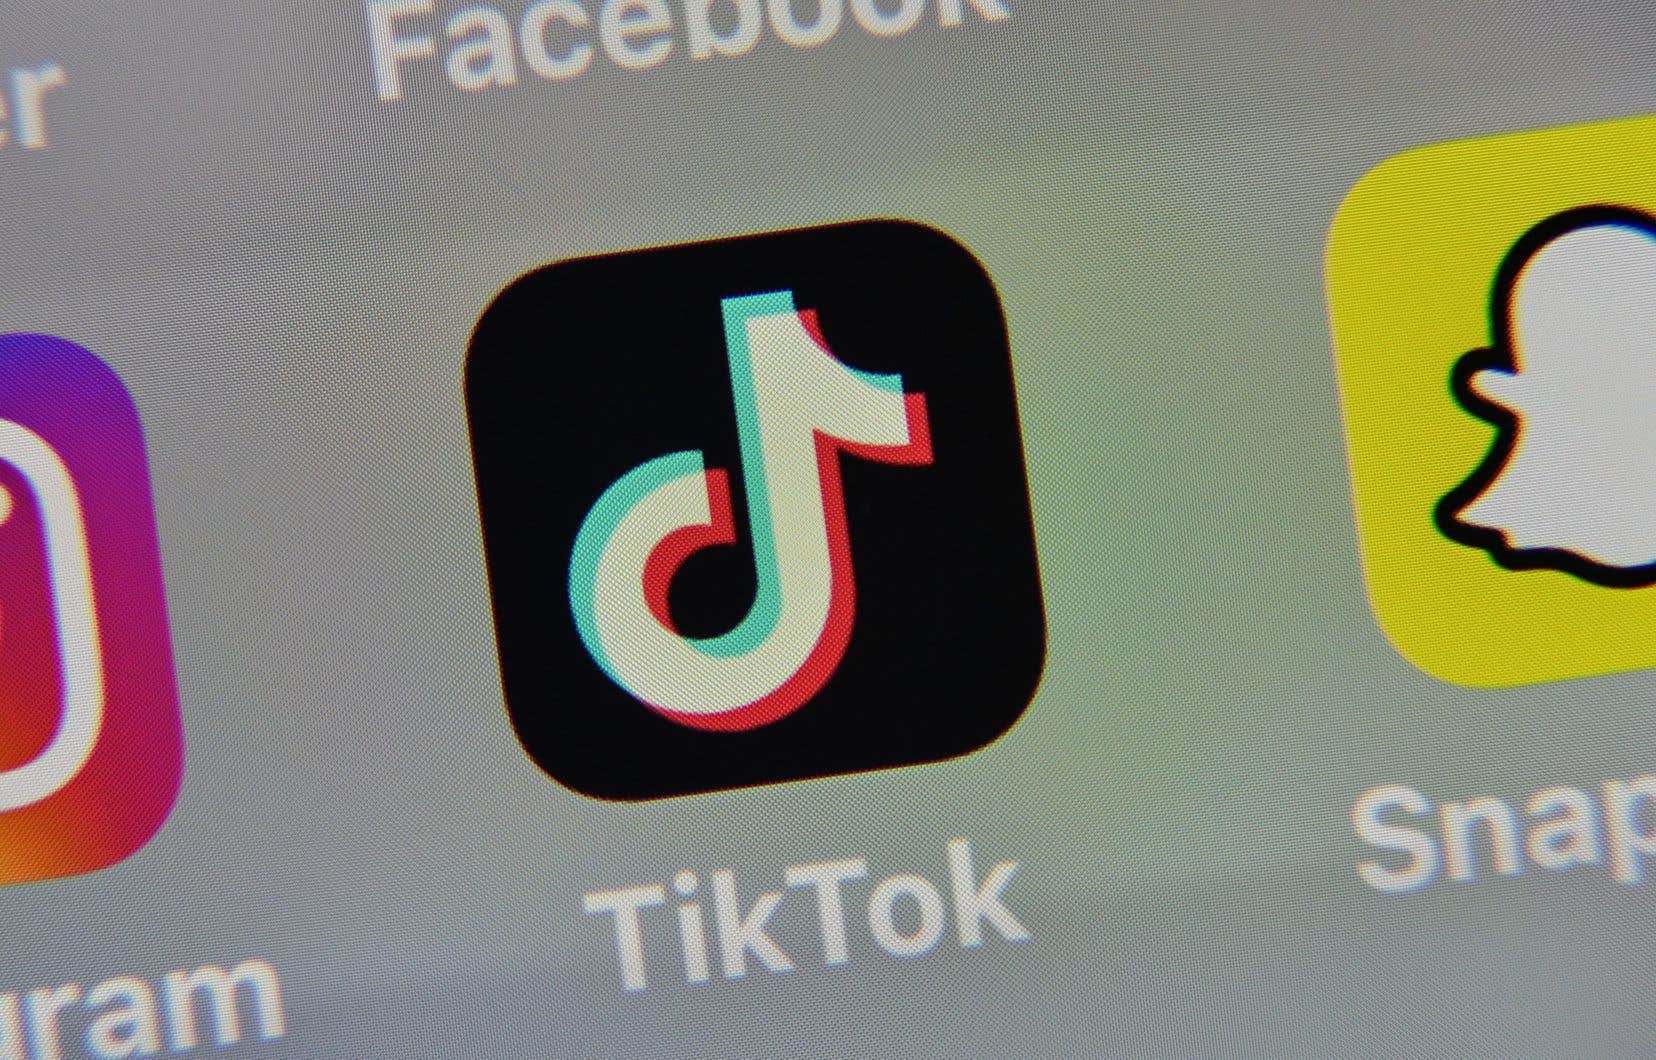 TikTok announces a new double-sided feature like BeReal's

